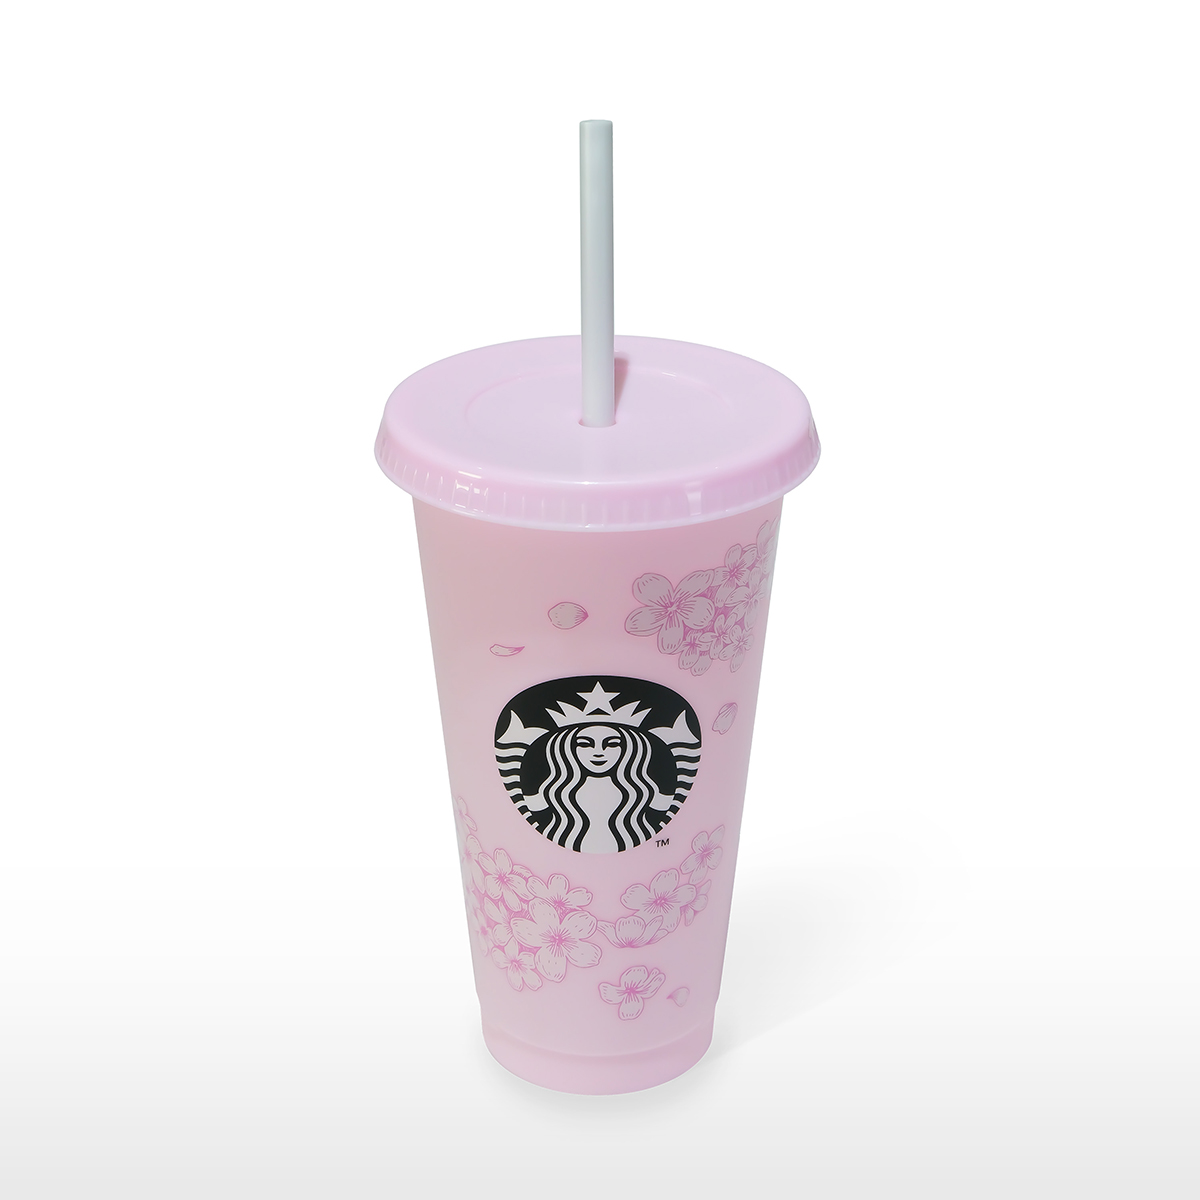 Ly Starbucks Reusable Cup  24Oz (710ml)  CHY BLOSSOM PETALS